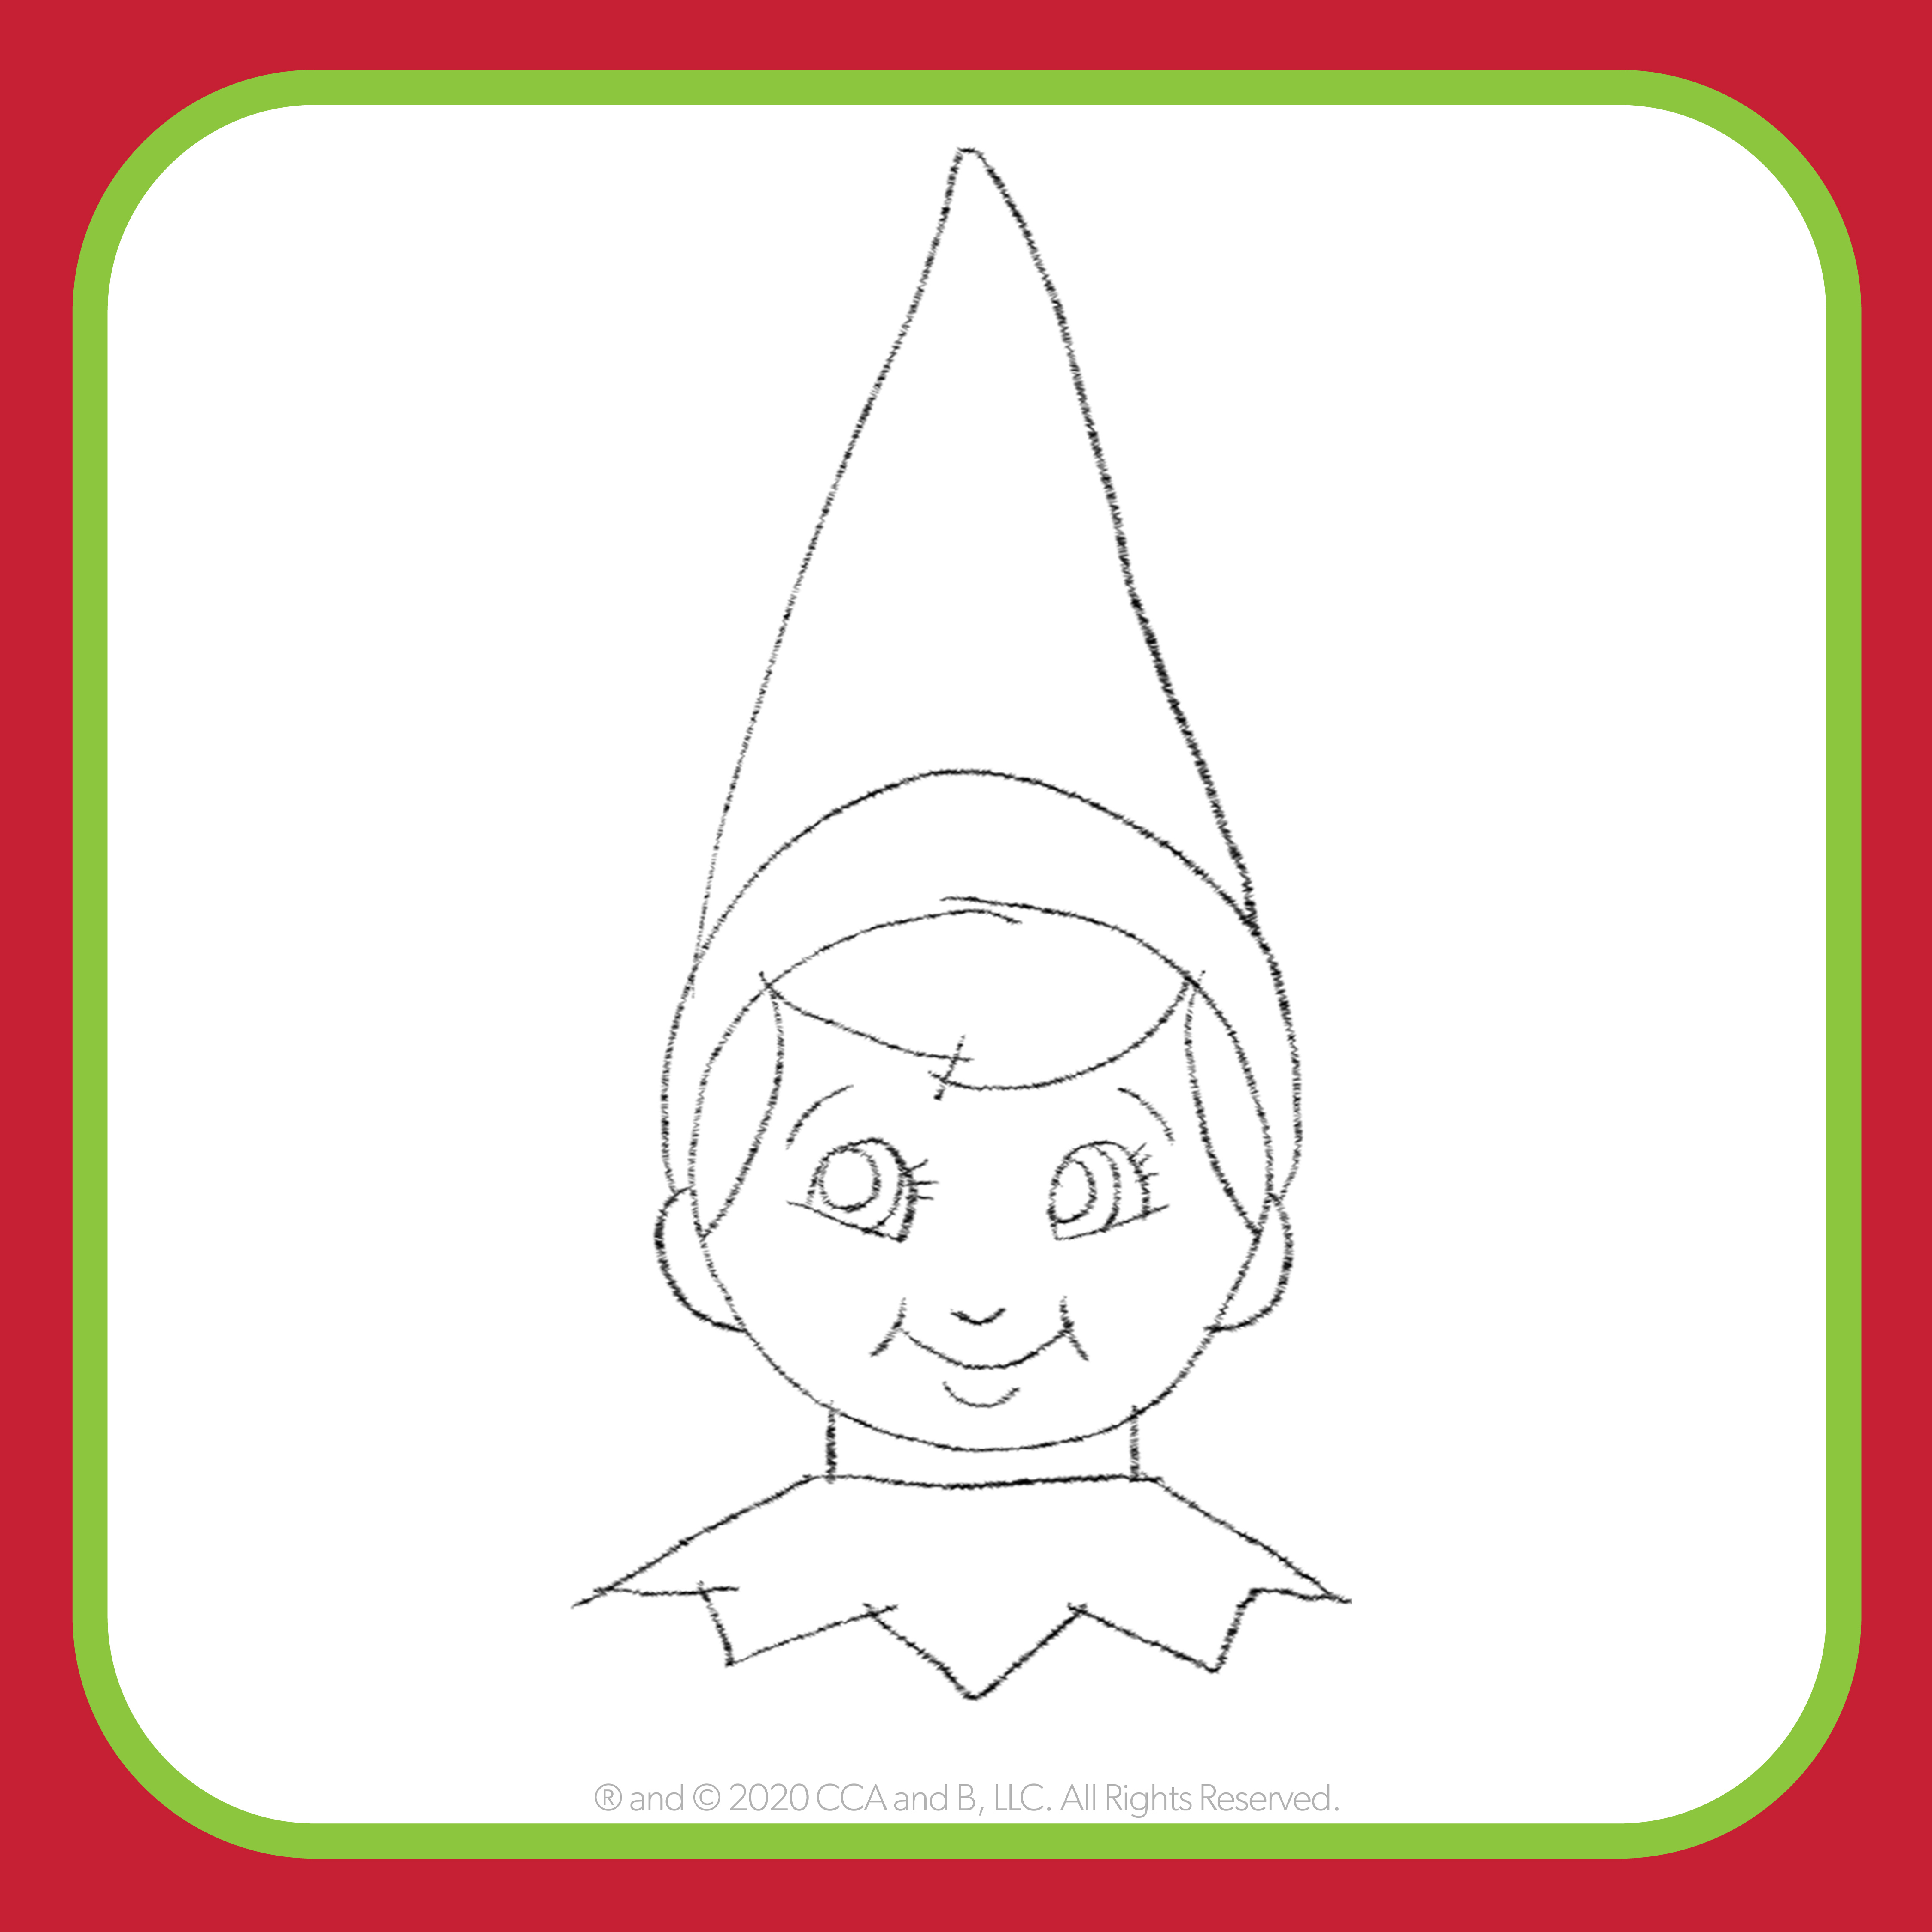 Learn How To Draw The Elf On The Shelf®